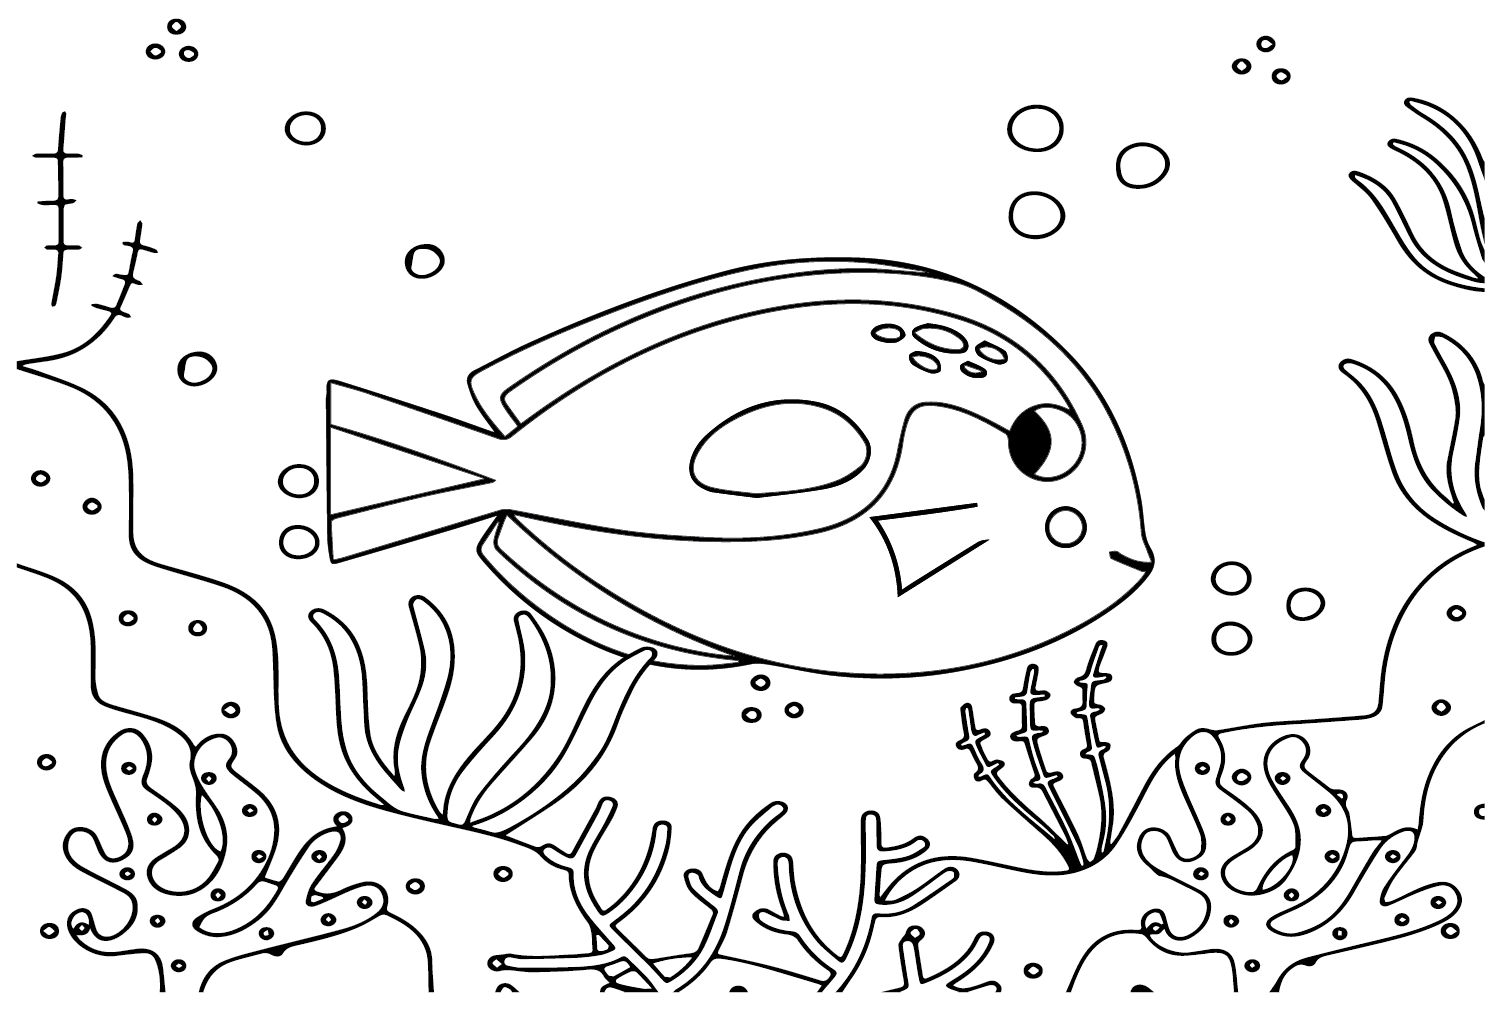 Saltwater Tang Fish Coloring Page - Free Printable Coloring Pages